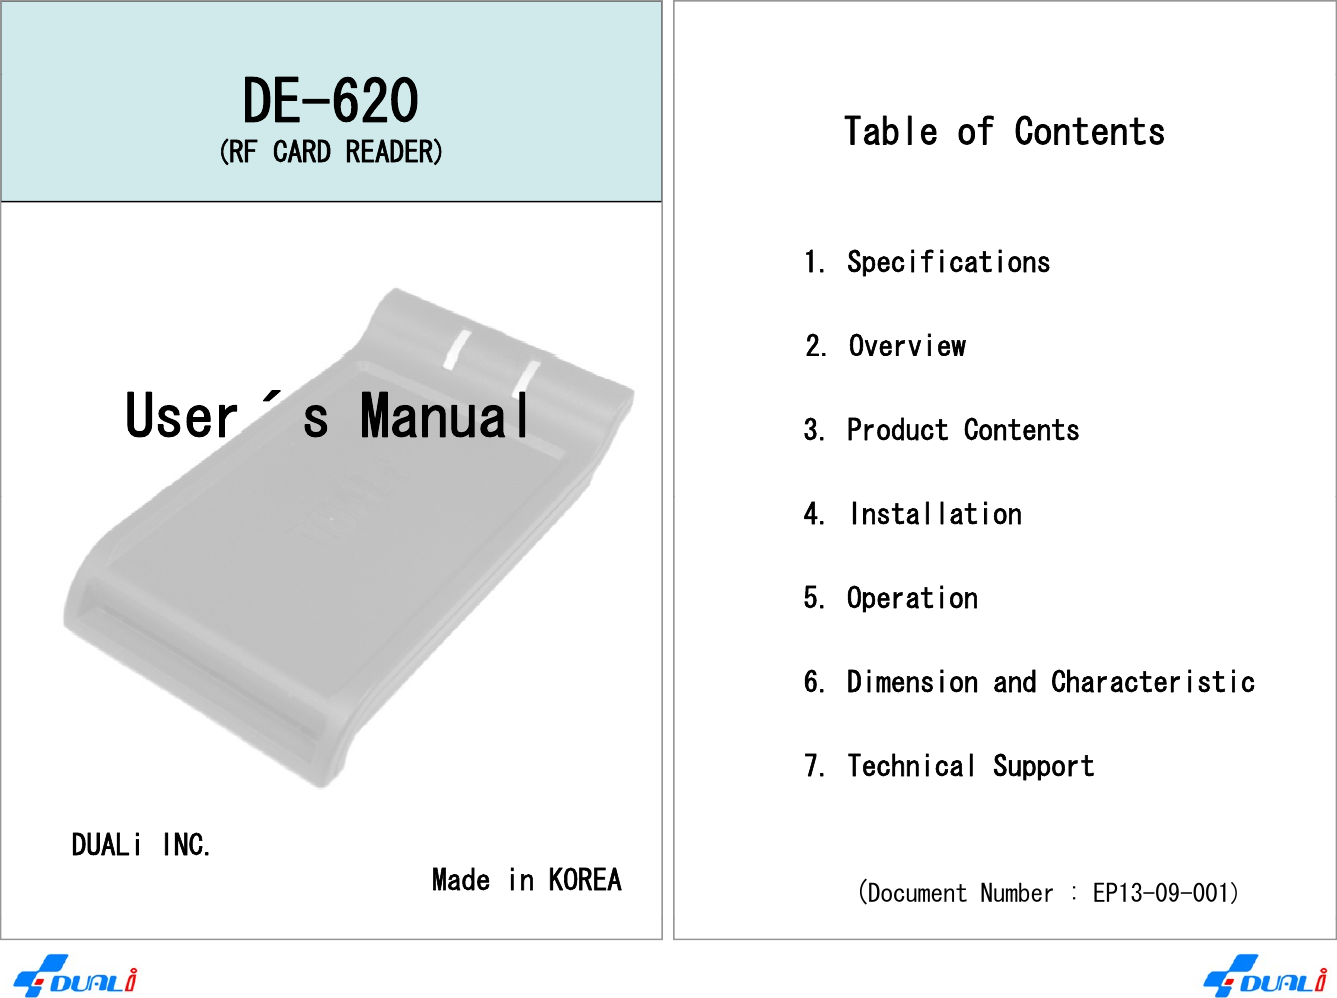 DE-620(RF CARD READER) Table of Contents1. Specifications2. OverviewUser´s Manual 3. Product Contents 4. Installation5. Operation 6. Dimension and Characteristic7. Technical SupportDUALi INC.Made in KOREApp(Document Number : EP13-09-001)